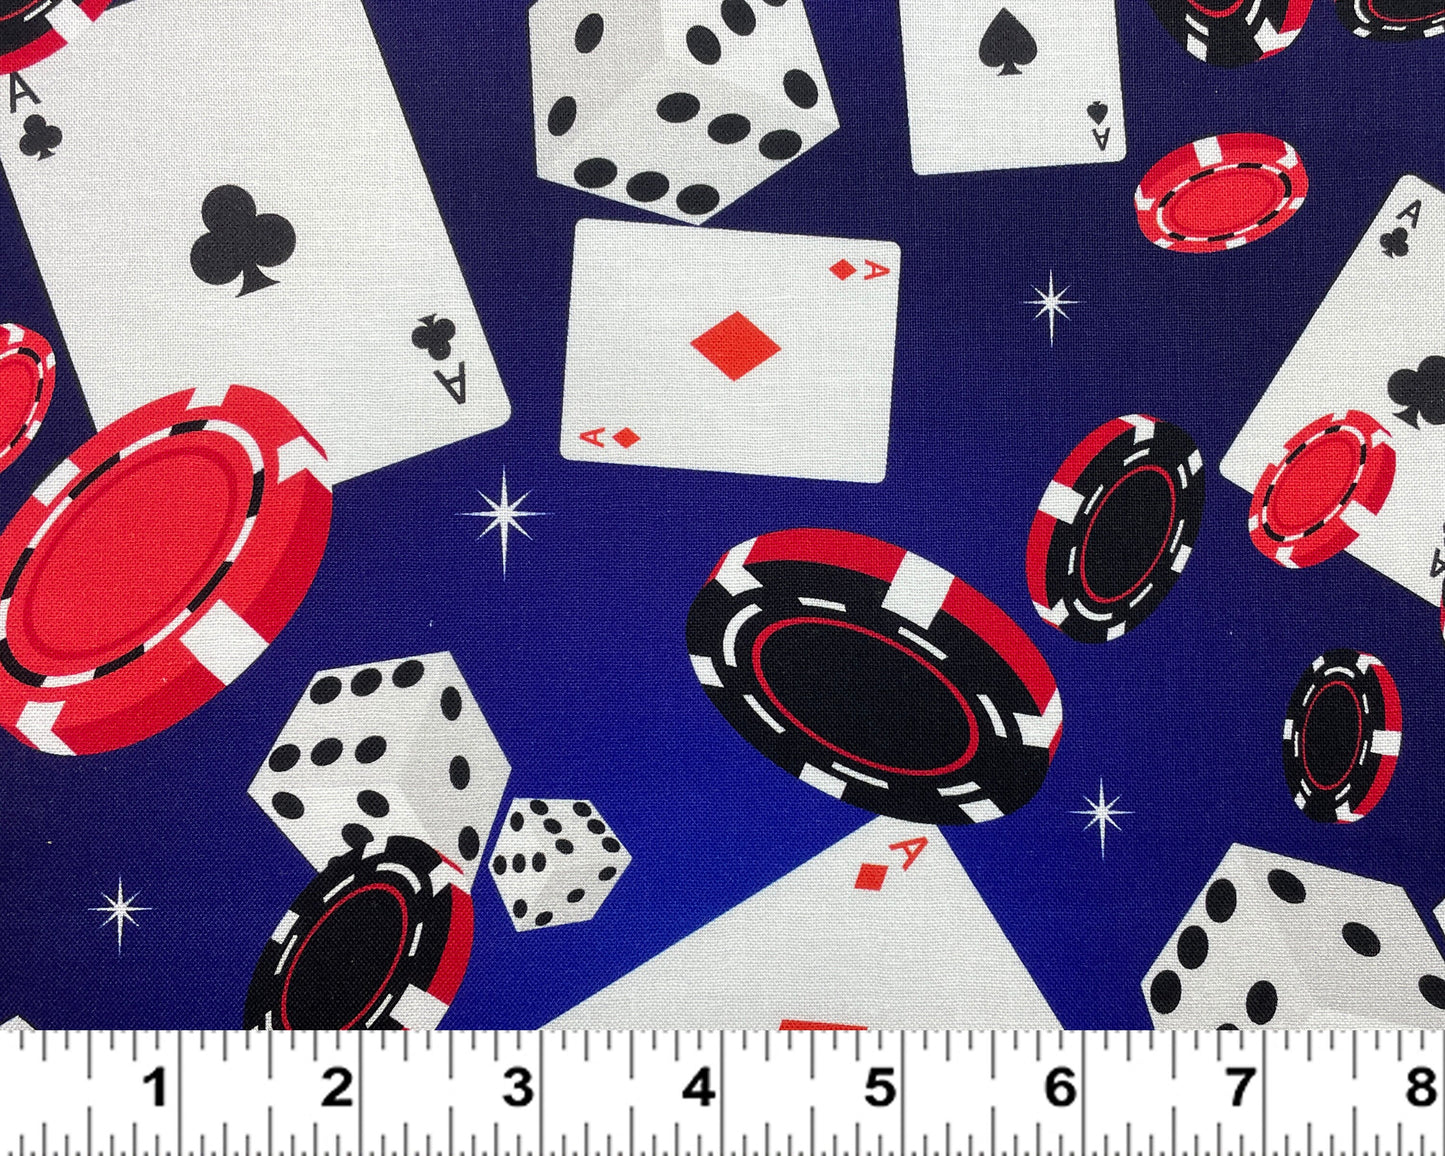 Casino Fabric by the yard - 100% cotton fabric - Poker Card fabric Casino Chips material Dice print Game Night theme - SHIPS NEXT DAY